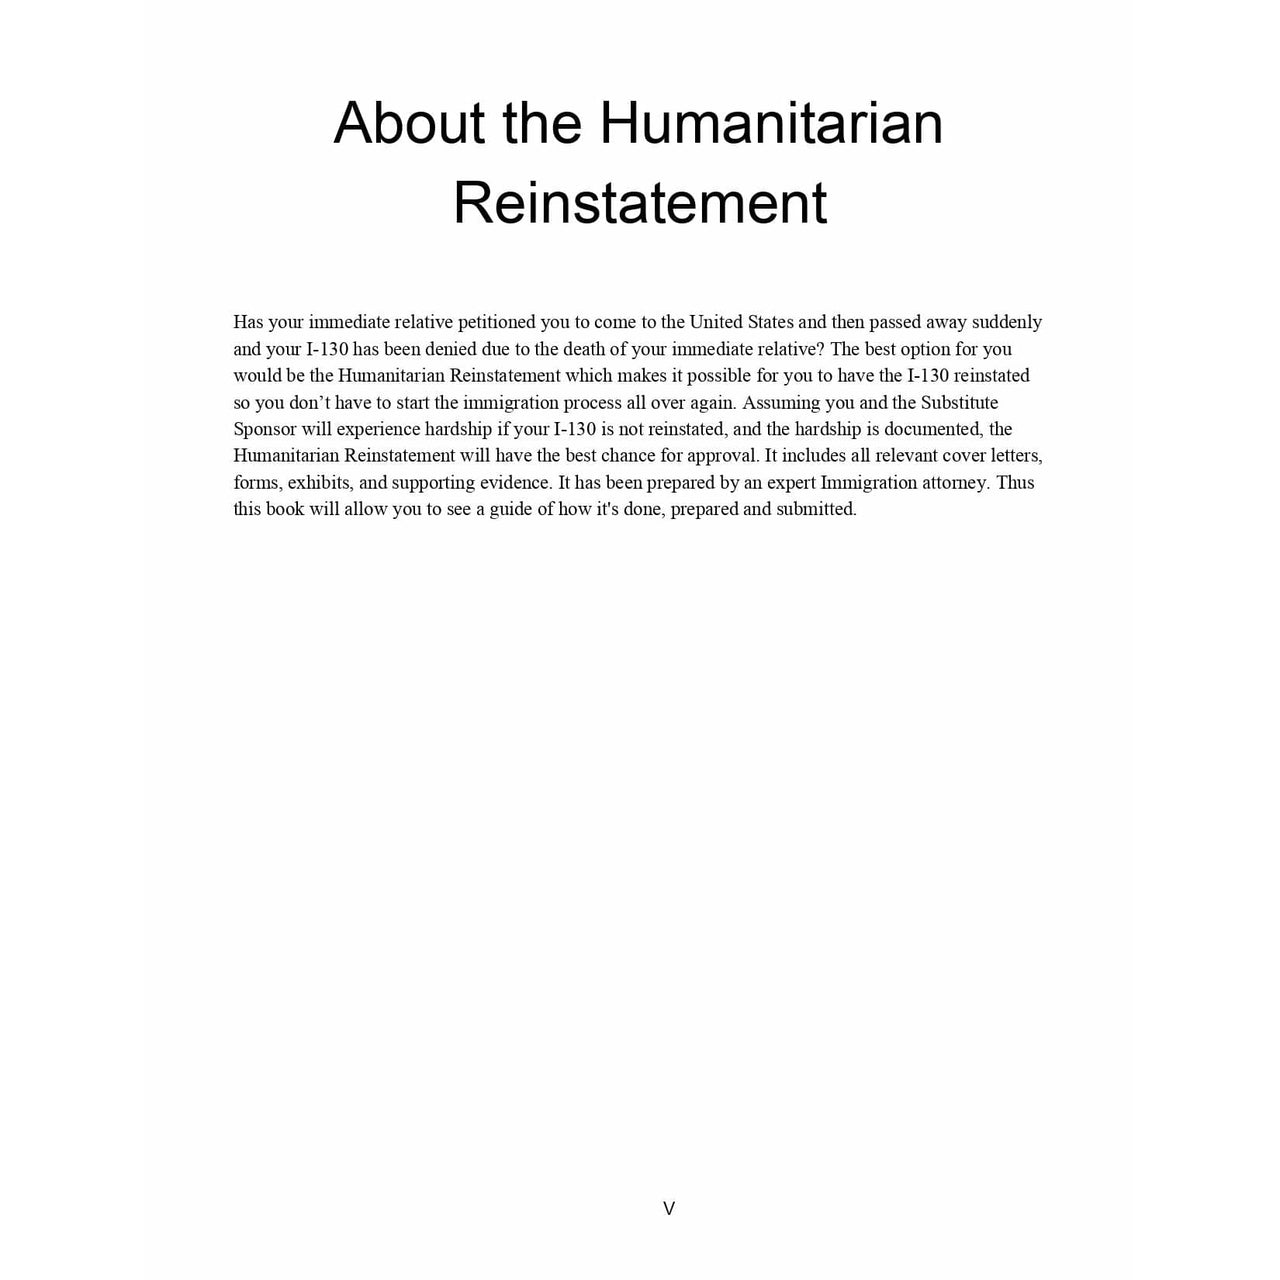 Attorney Drafted Immigration Petitions: Humanitarian Reinstatement - Rocket Immigration Petitions